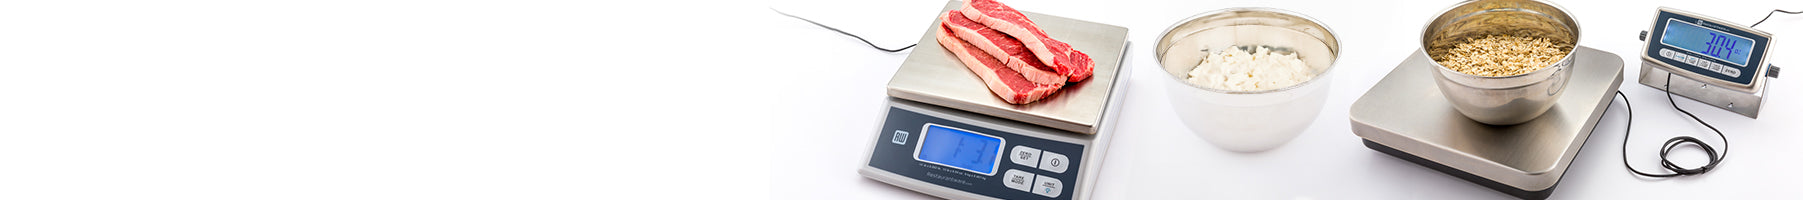 Banner_Equipment_Food-Scales_349